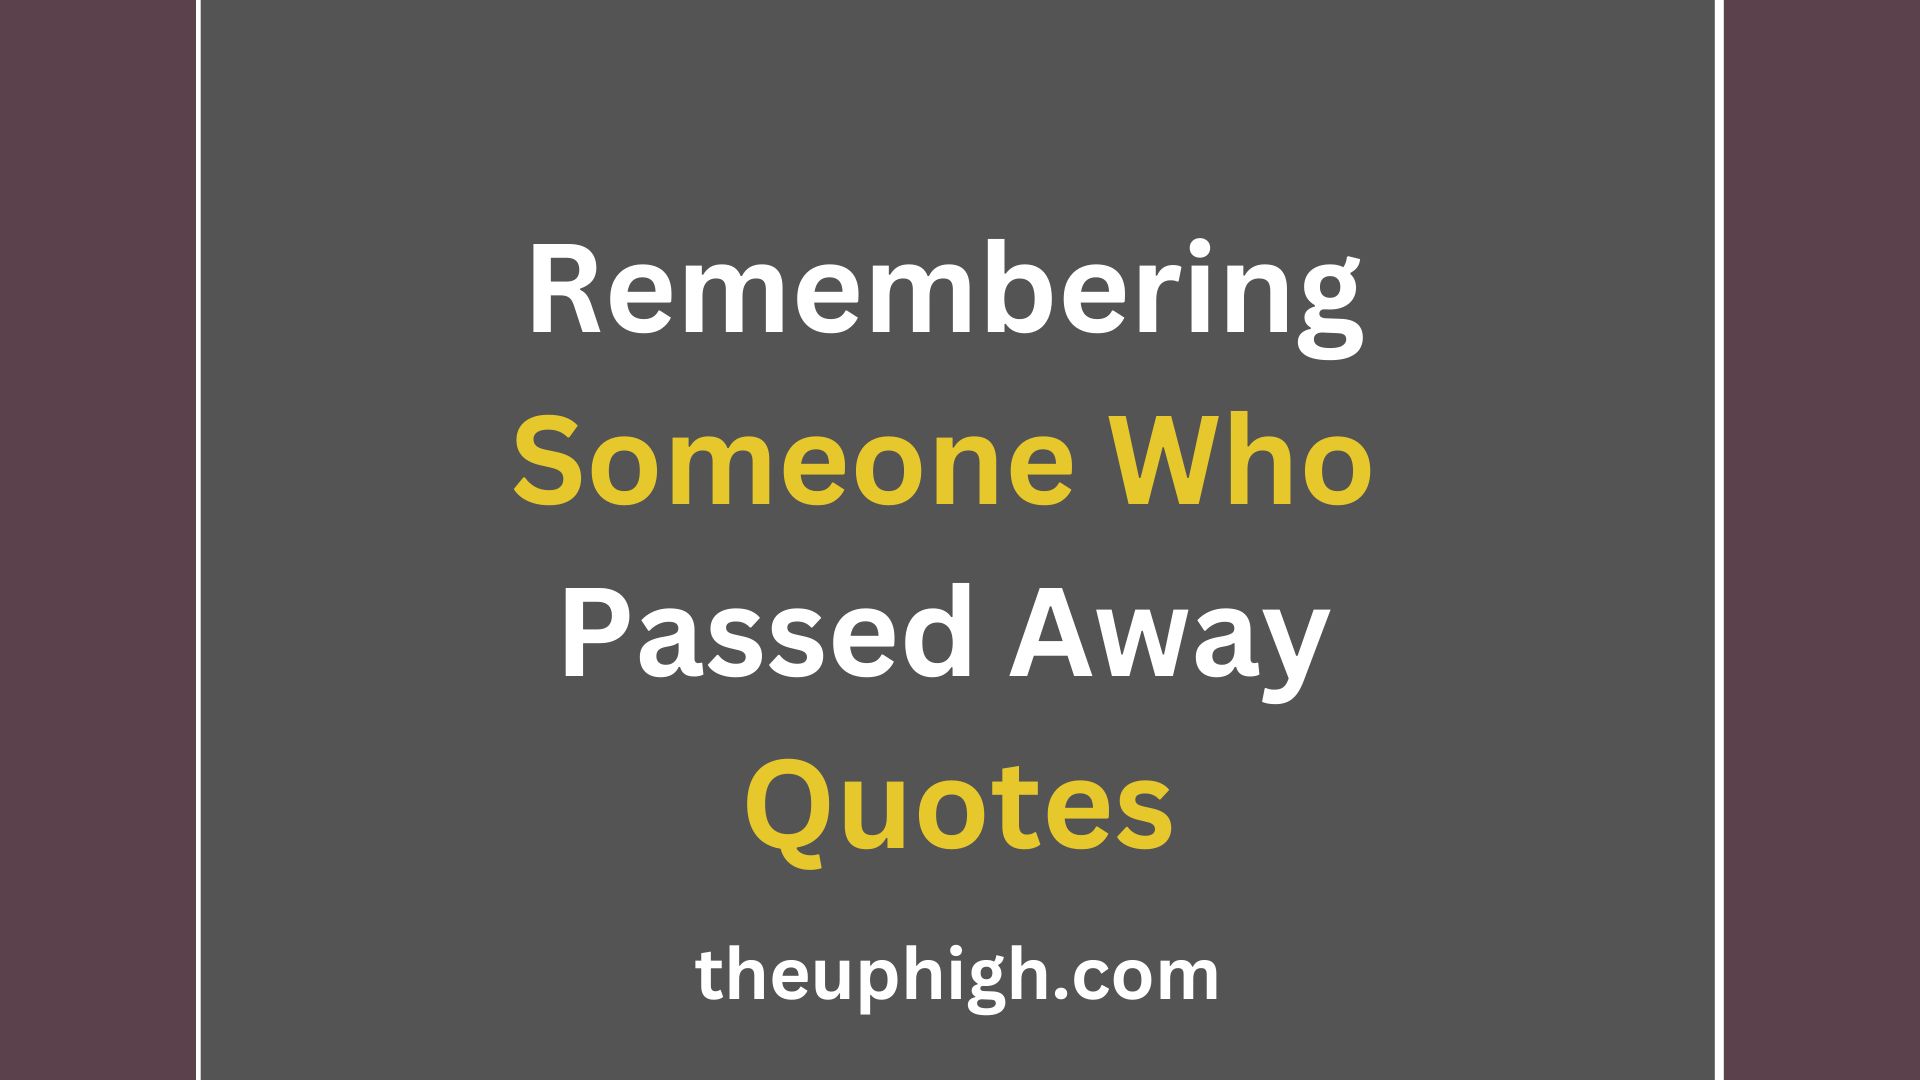 Remembering Someone Who Passed Away Quotes